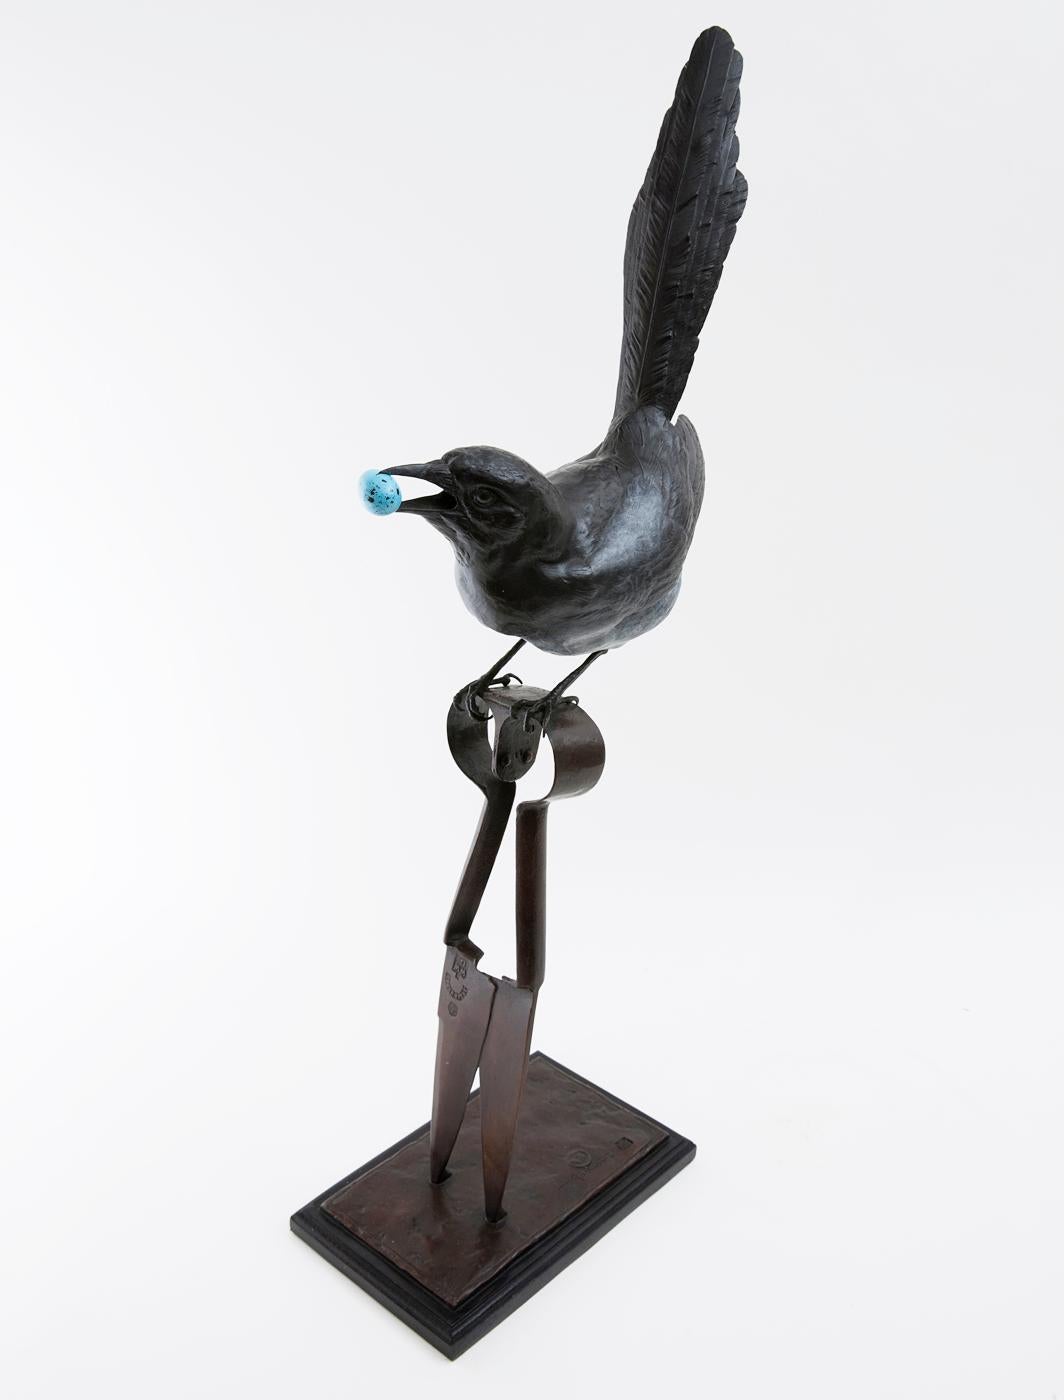 Life size Magpie resting on a pair of sheep shears.

Lost wax method casting process limited edition bronze.

This being 1/12 of the edition.